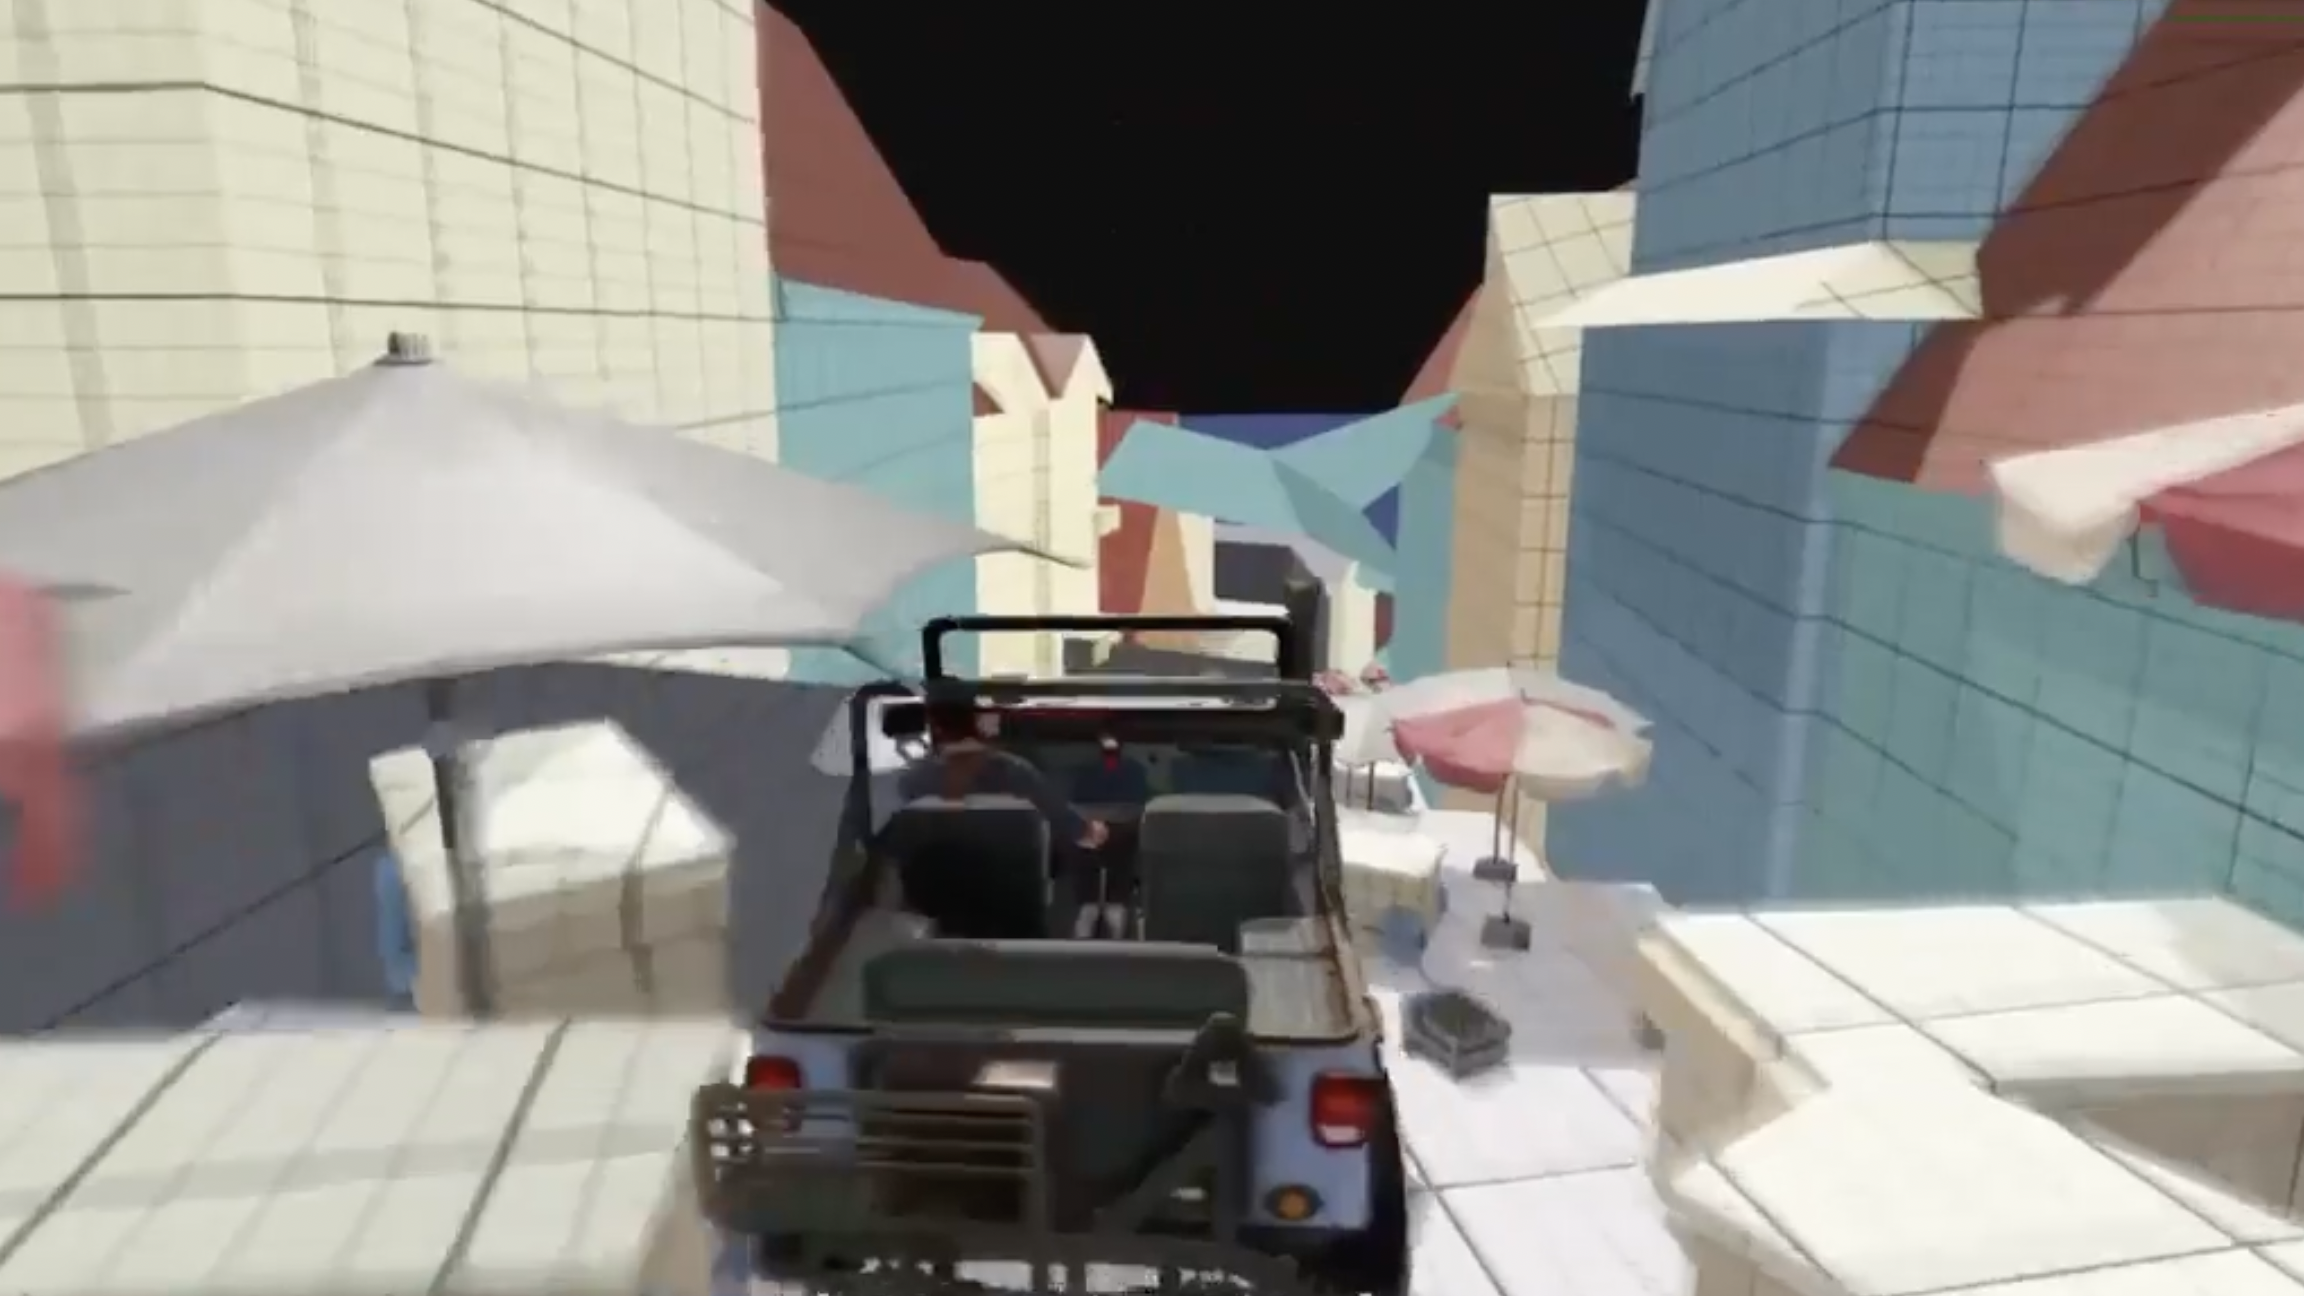 This Is Why GTA 6 Could Be One of the Most Visually Advanced Games